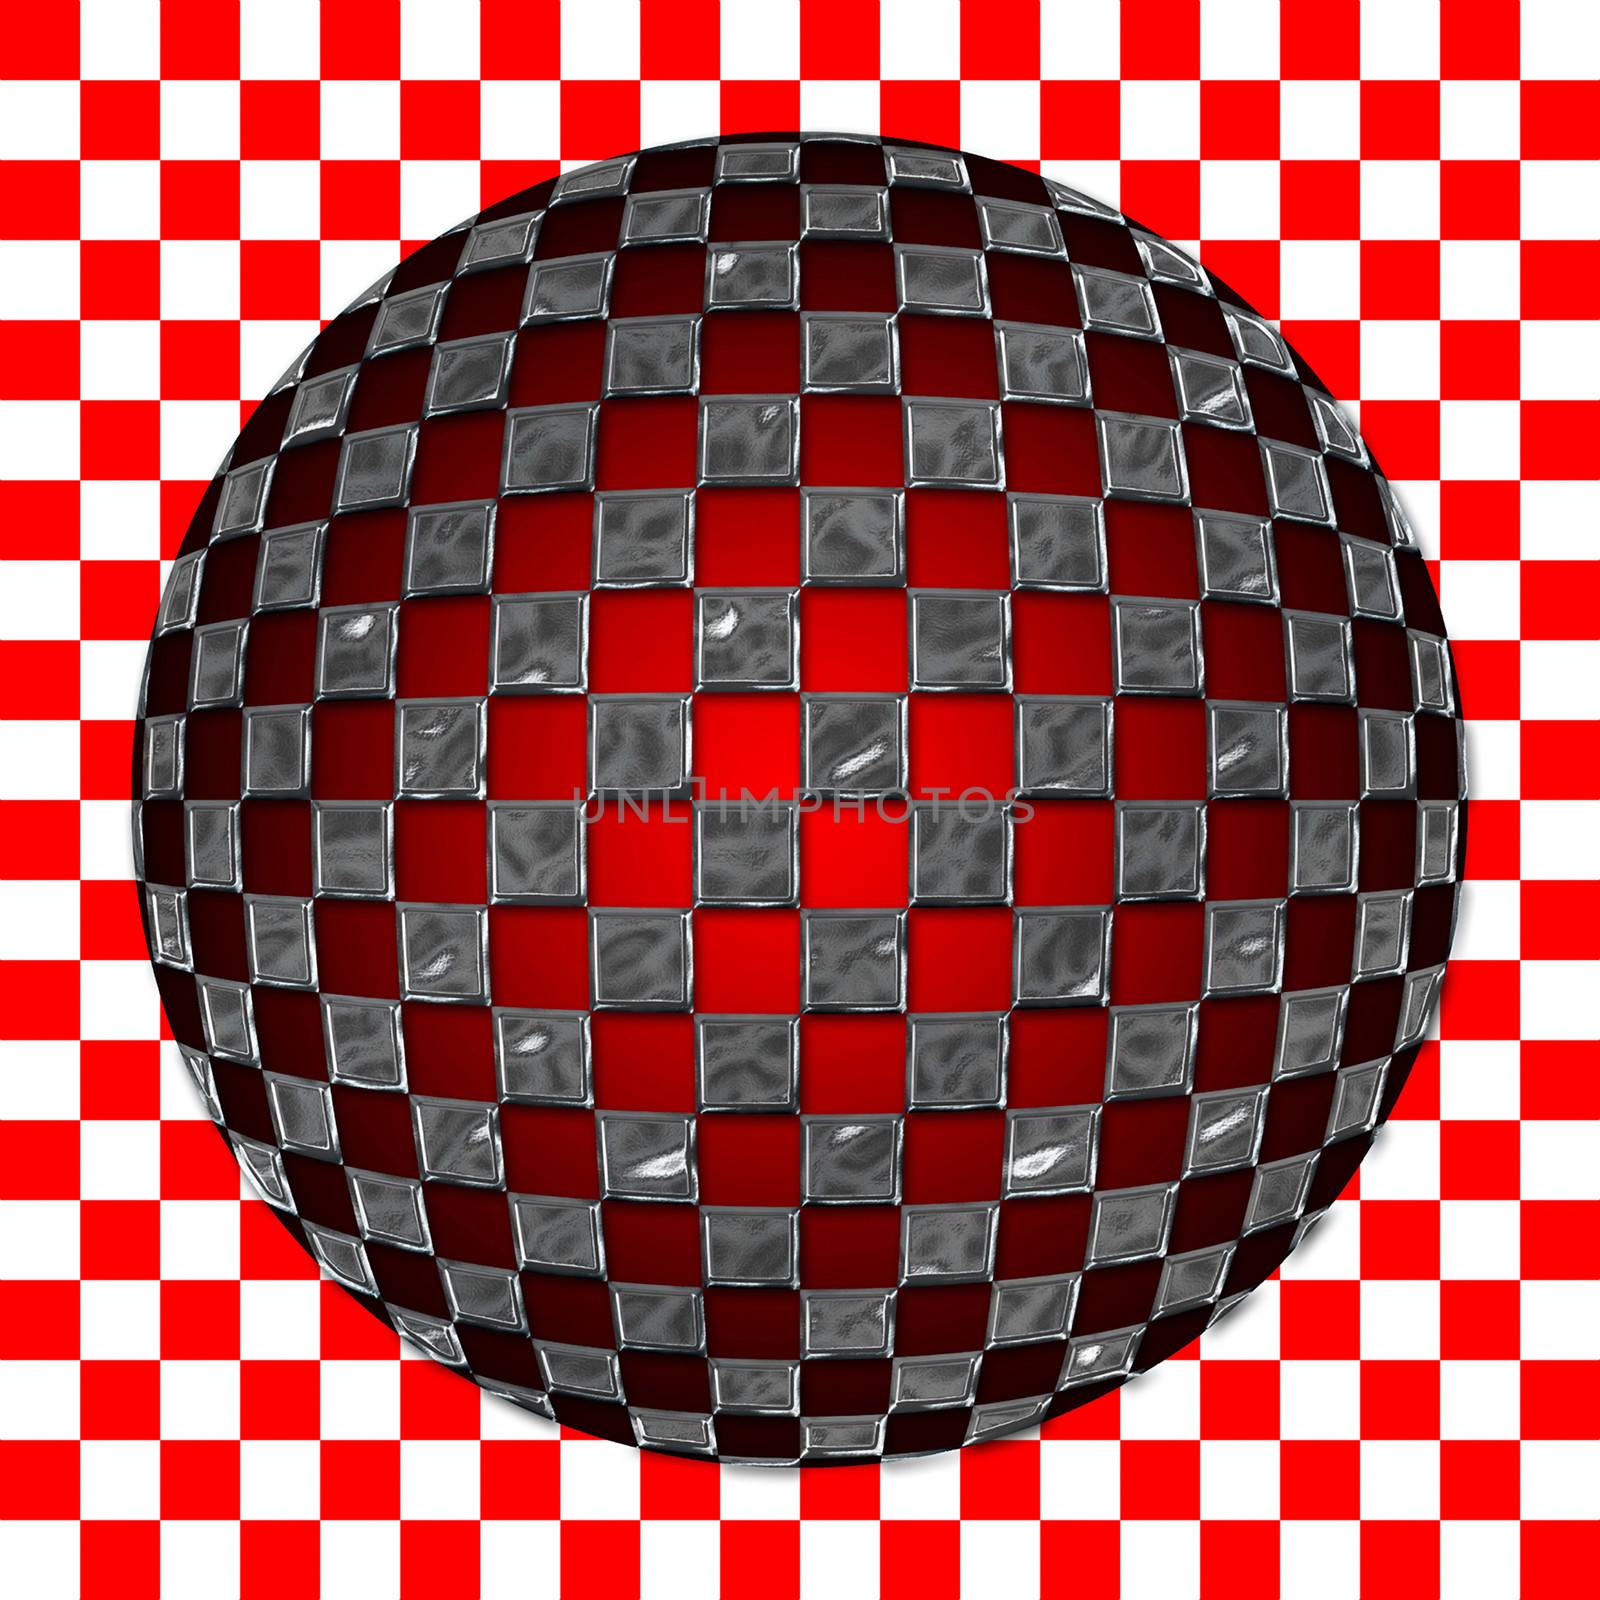 Checkered sphere by CelsoDiniz